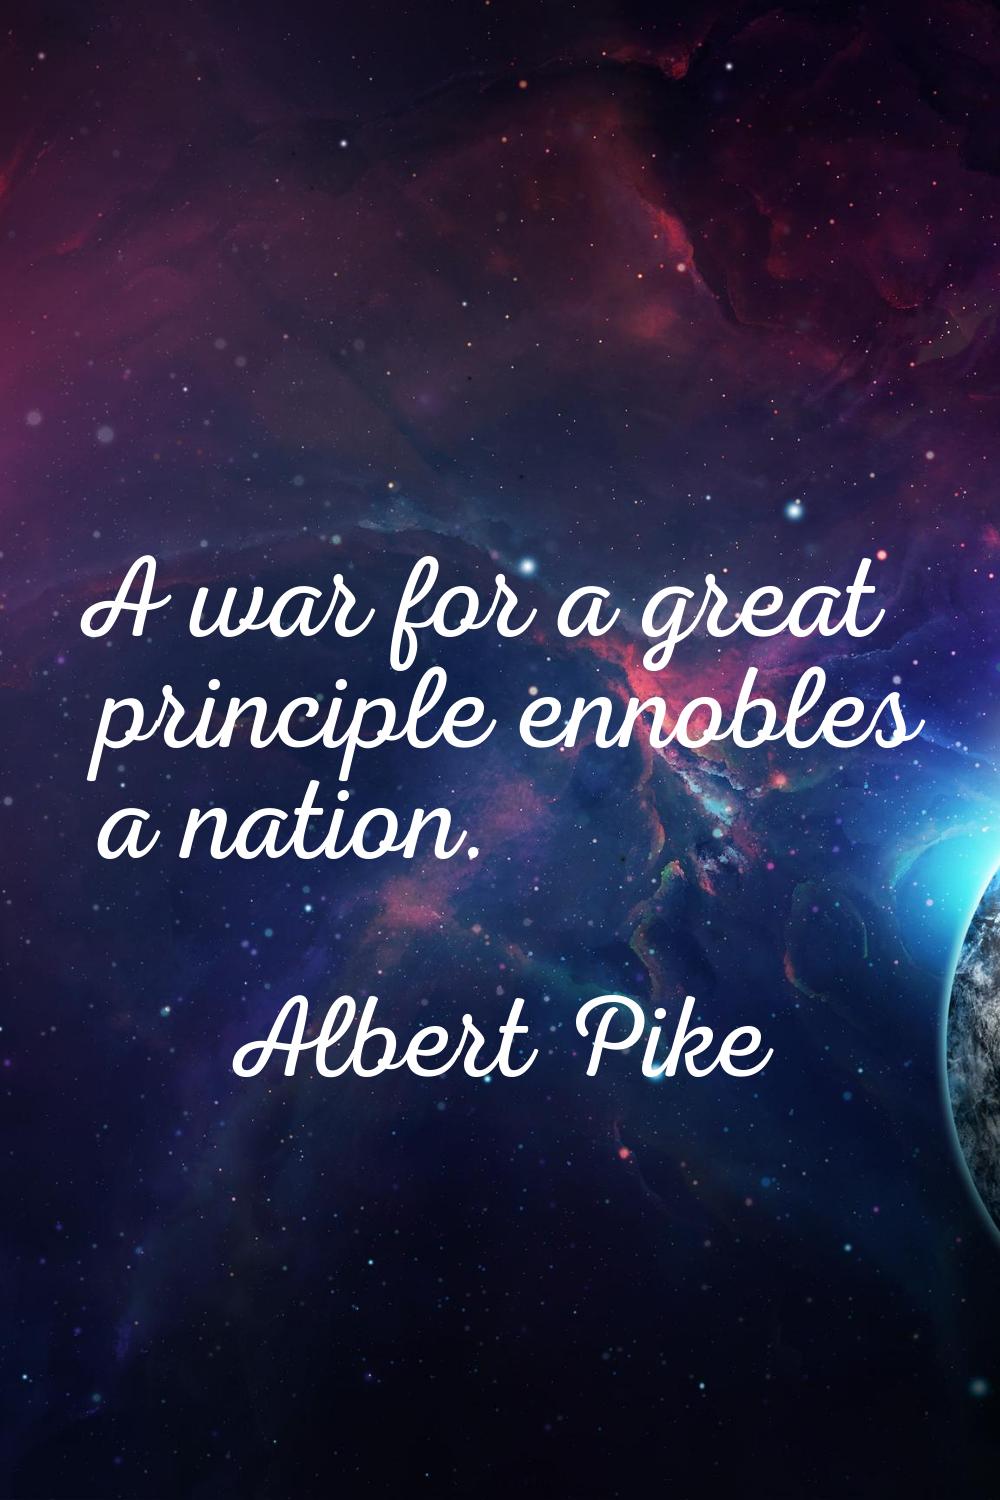 A war for a great principle ennobles a nation.